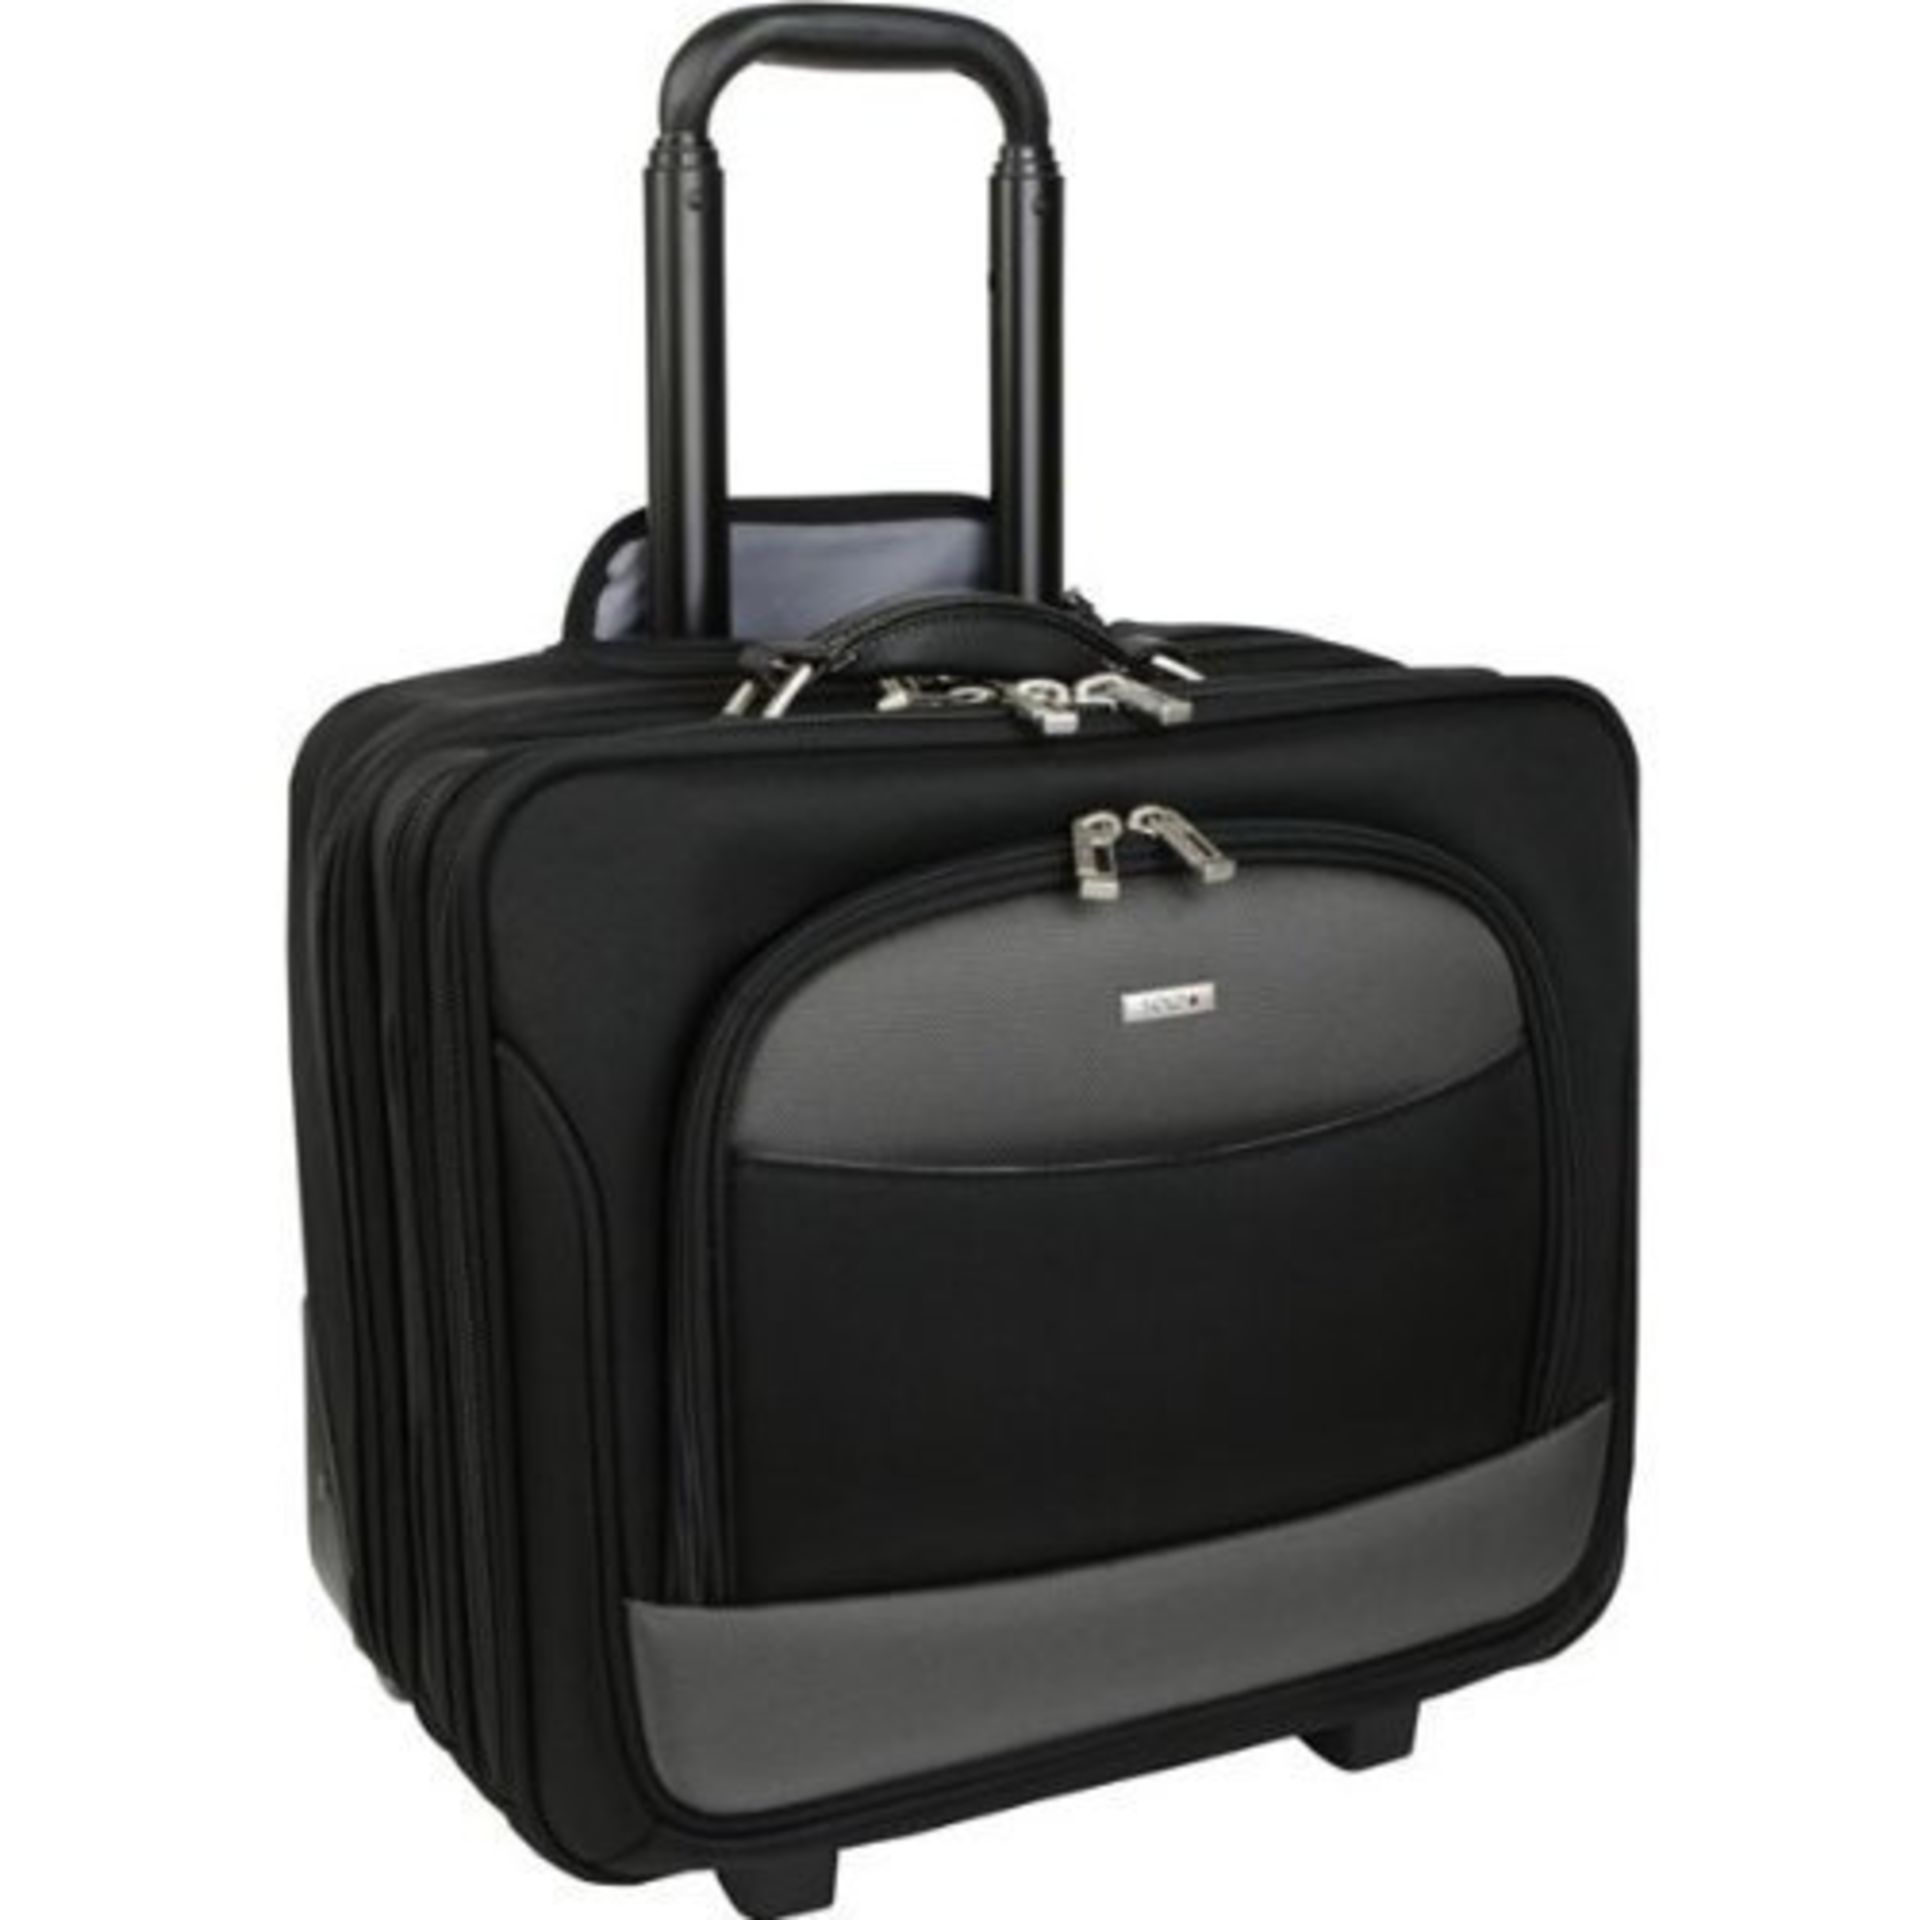 SOLO B120 Rolling Business/Laptop Case - RRP £89.99 (New & Boxed)